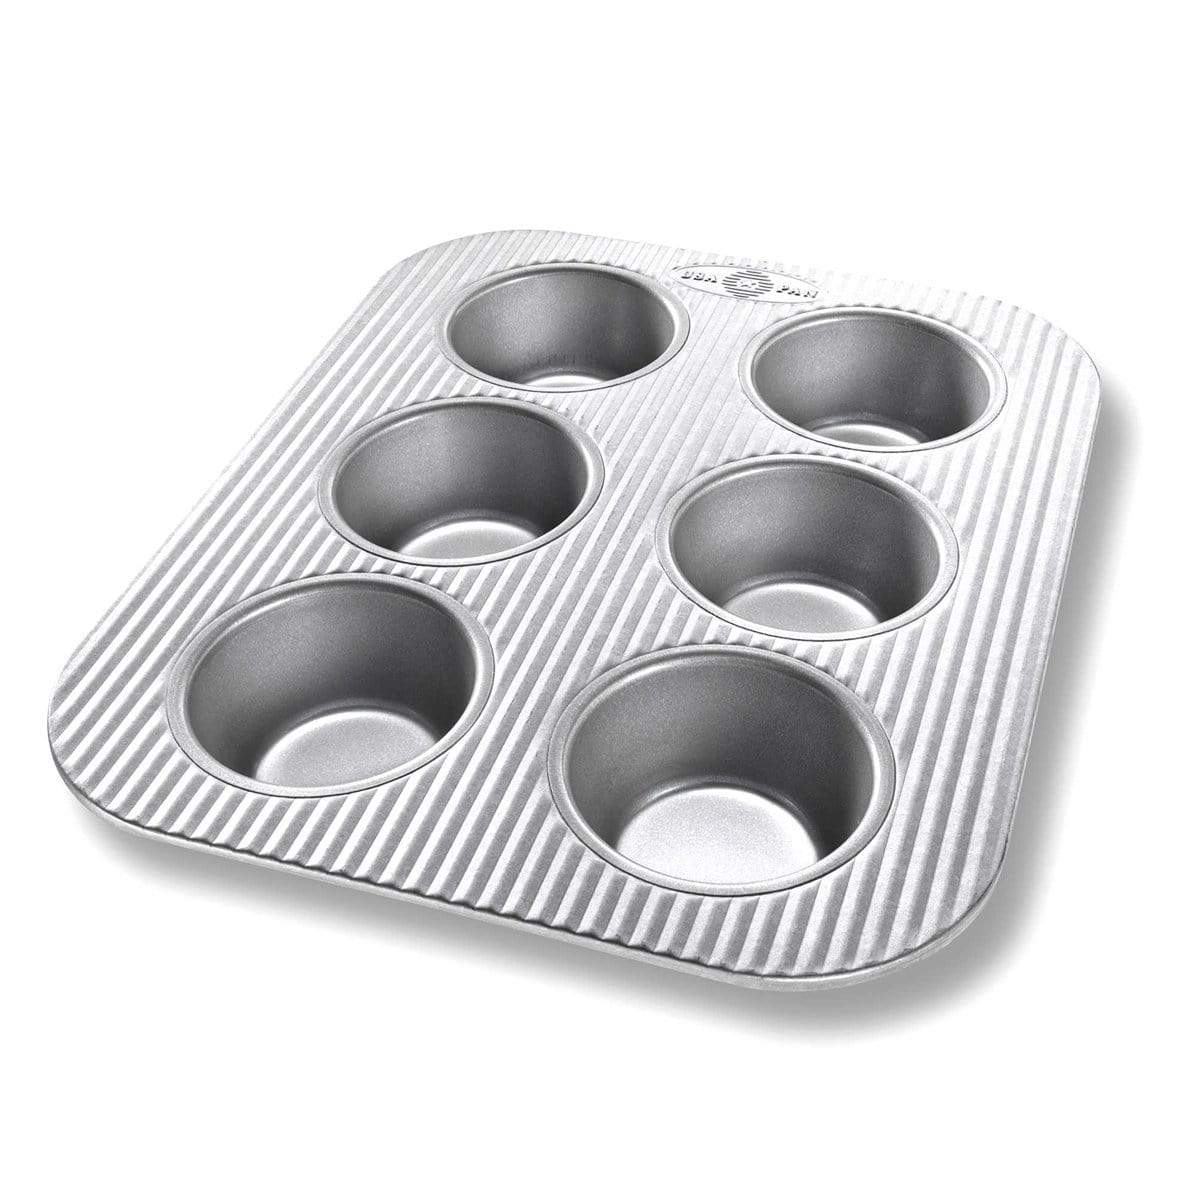 Chicago Metallic Williams Sonoma 6-Cup Popover Pan with Armor-Glide  Coating, New